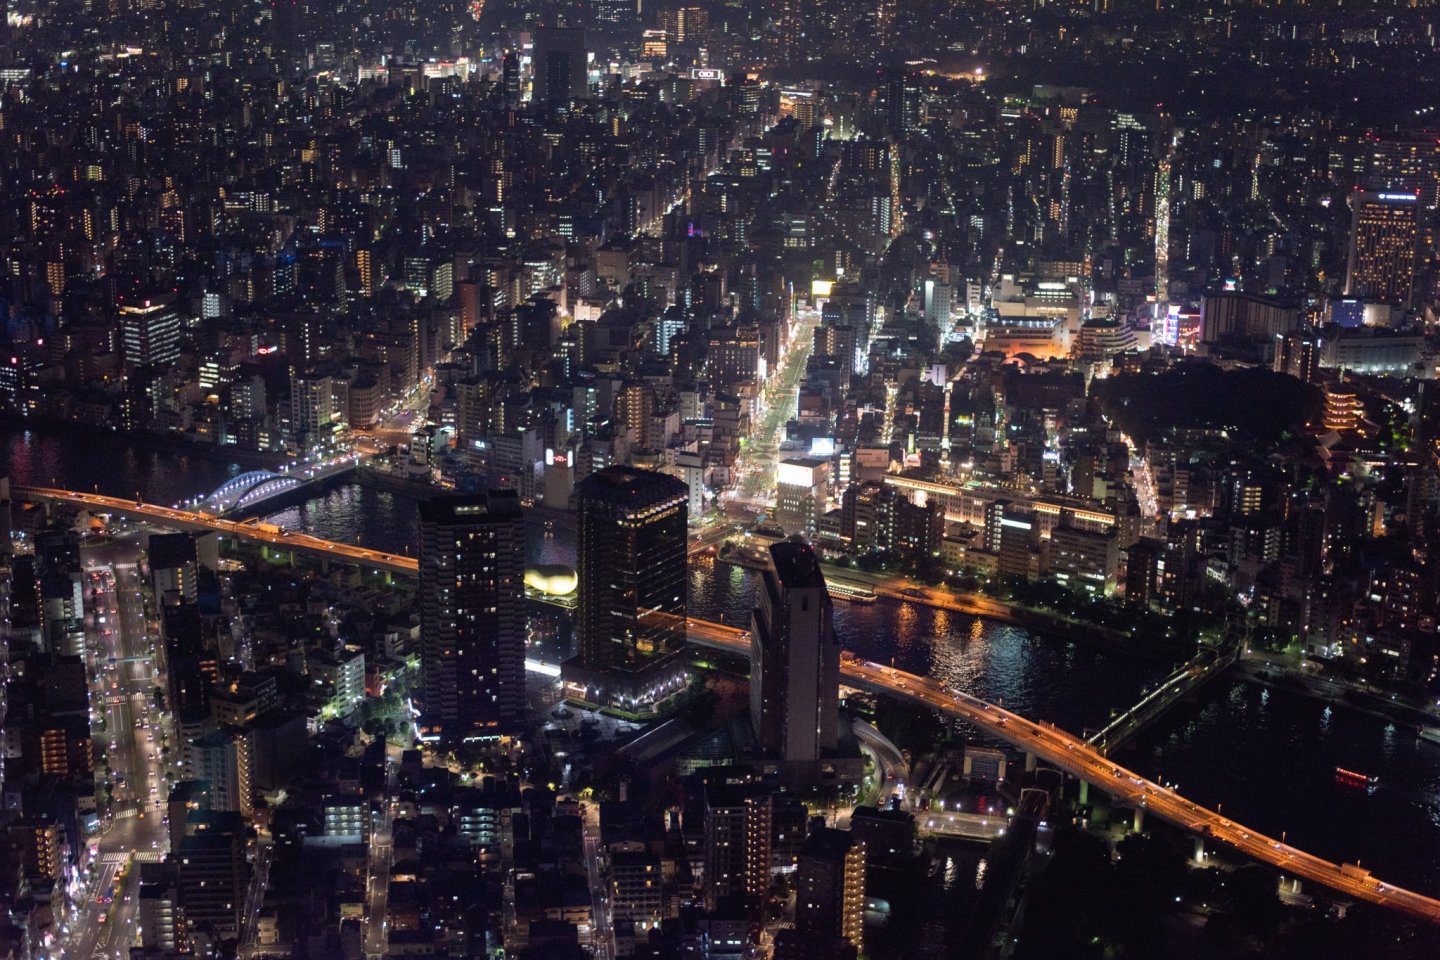 Cityscape of Tokyo at night, from the Skytree